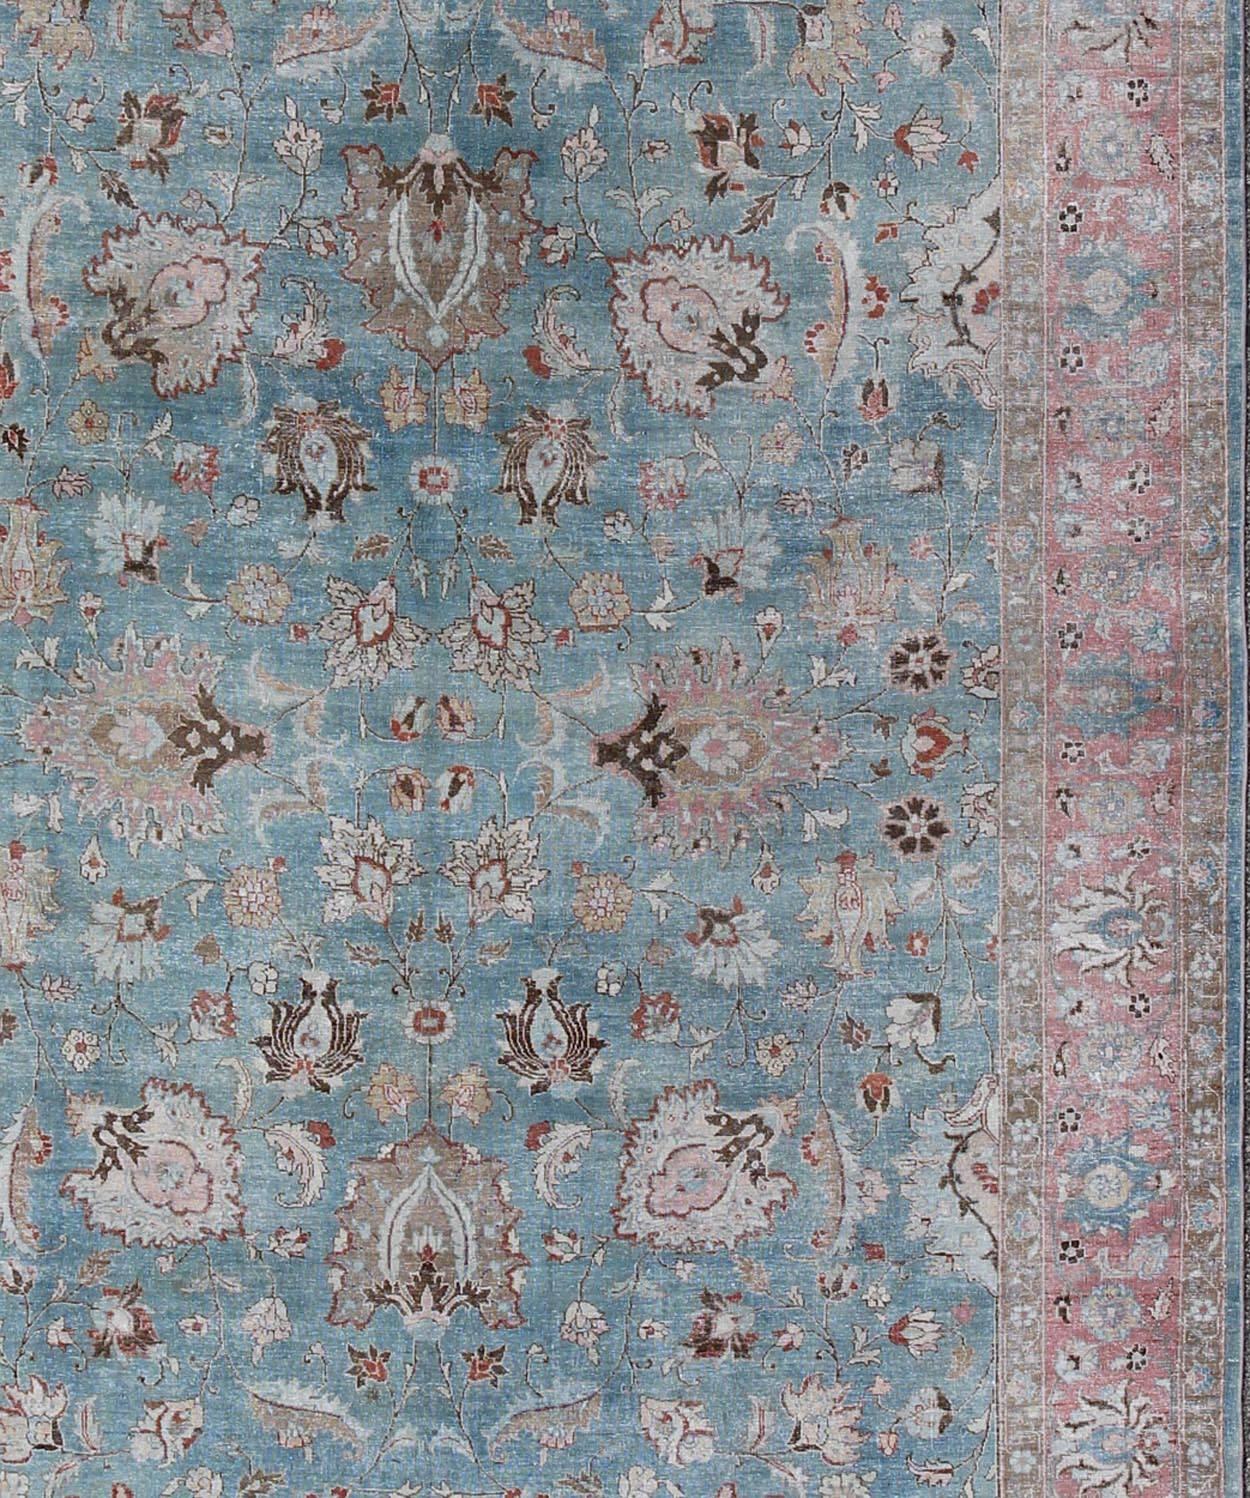 Sky Blue and Light Pink Antique Persian Tabriz Rug with Taupe Floral Motifs, rug sus-4709, country of origin / type: Iran / Tabriz, circa 1920

This antique Persian Tabriz carpet from the early 20th century (circa 1920) features a refined palate of